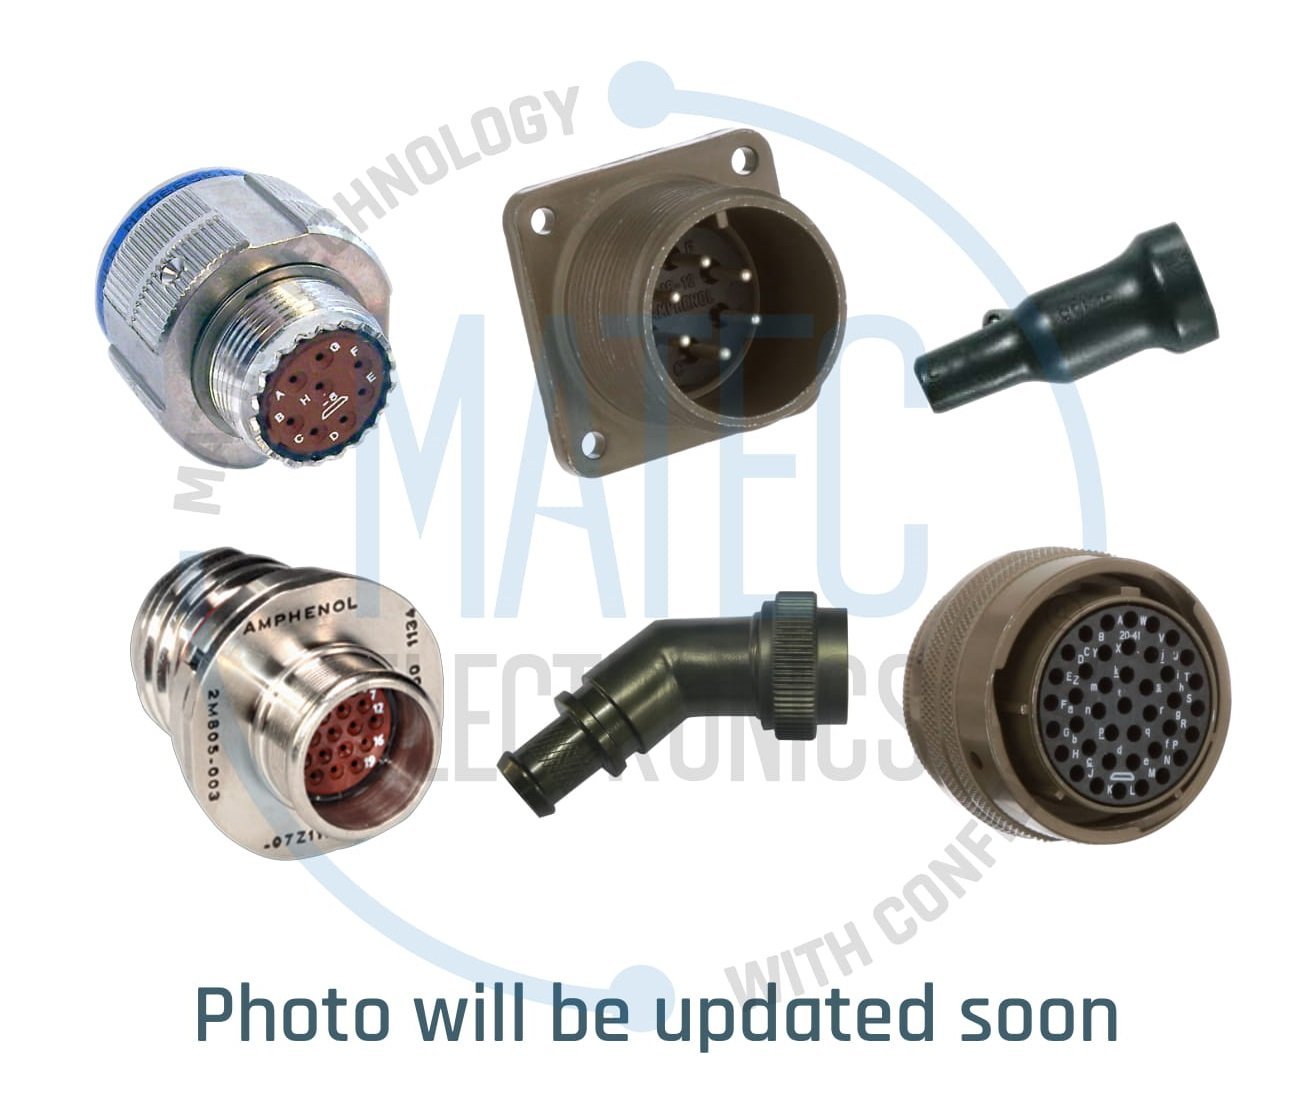 OTHER CONNECTOR ACCESSORIES